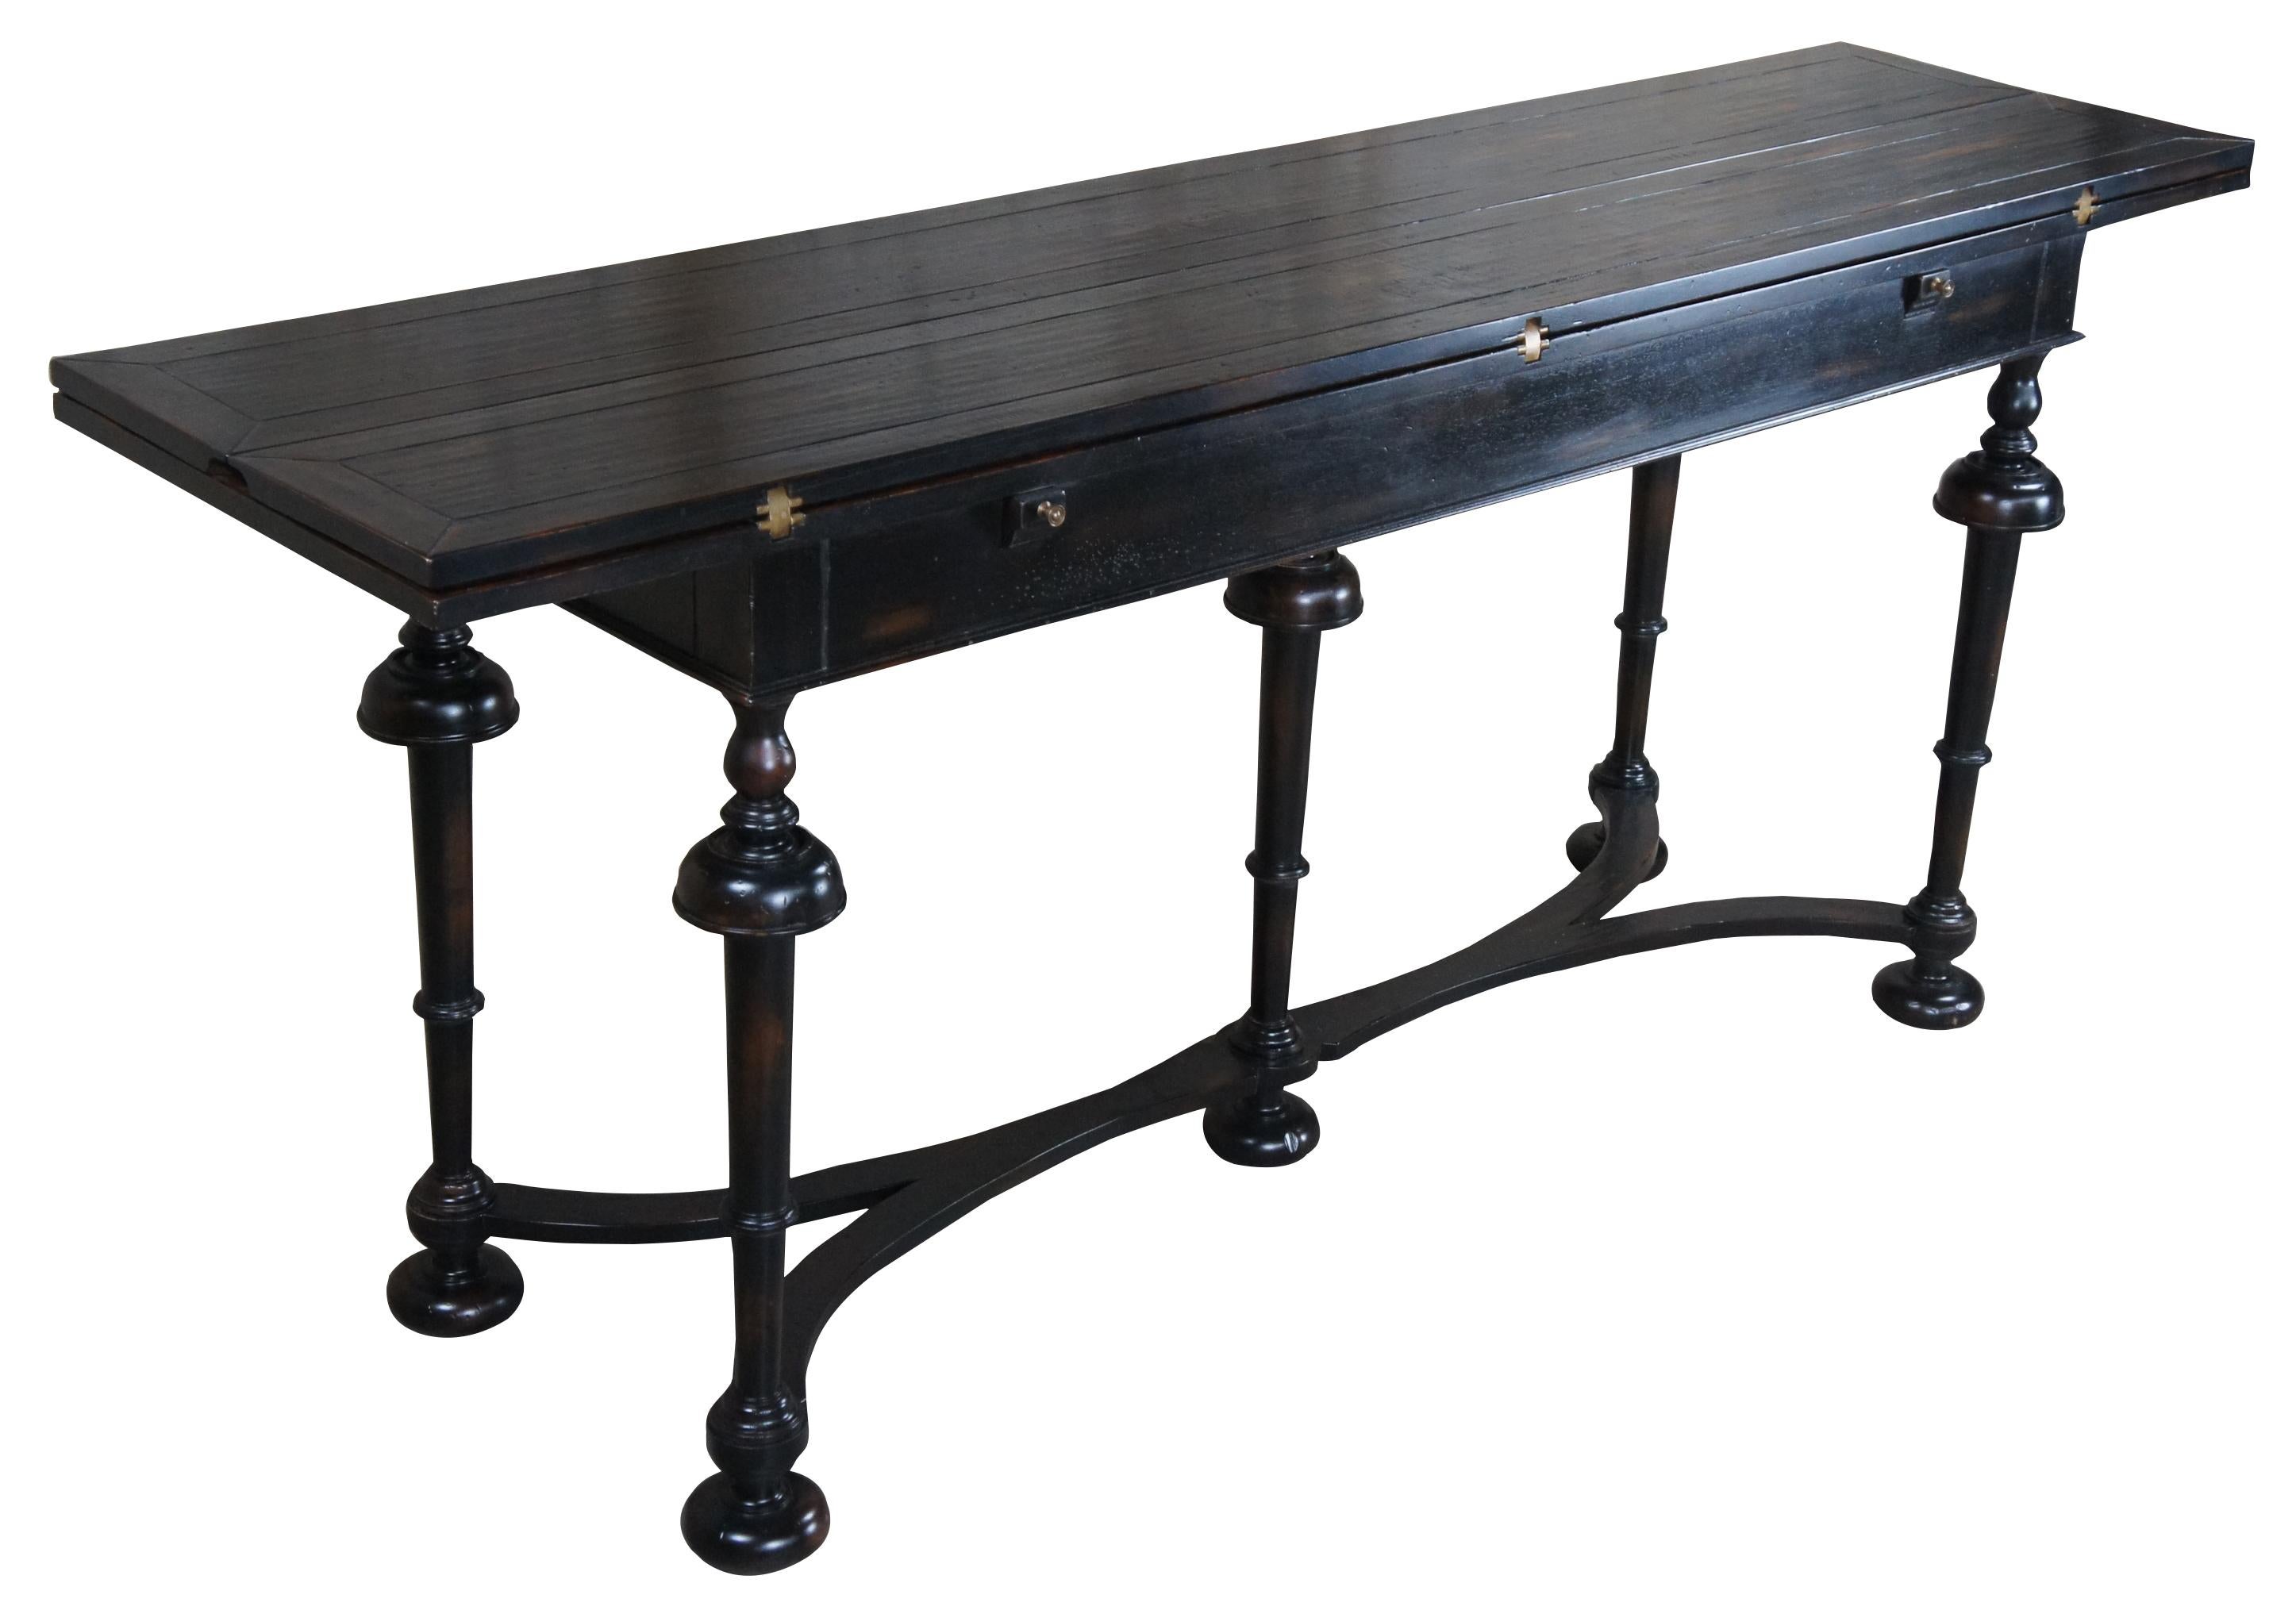 Henredon Acquisitions Townley Console Table with Fold Out Top, #3031-44-661.  Inspired by classic William & Mary style cup and trumpet turned legs leading to bun feet interconnected by stretchers.  Made from mahogany with an distressed and ebonized